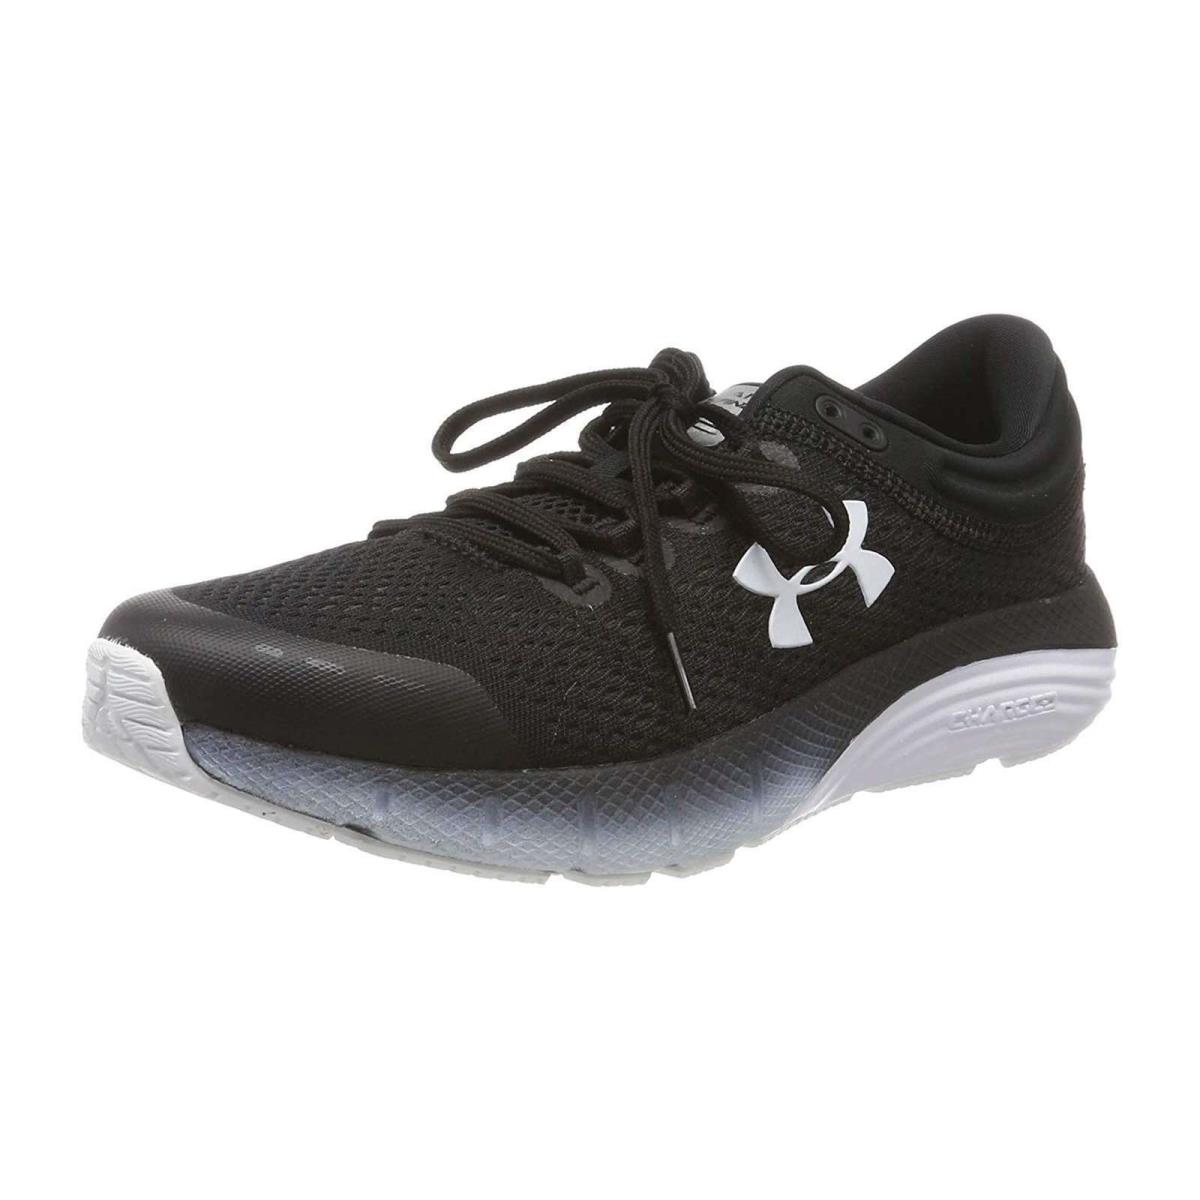 Under Armour Women Charged Bandit 5 Running Shoes